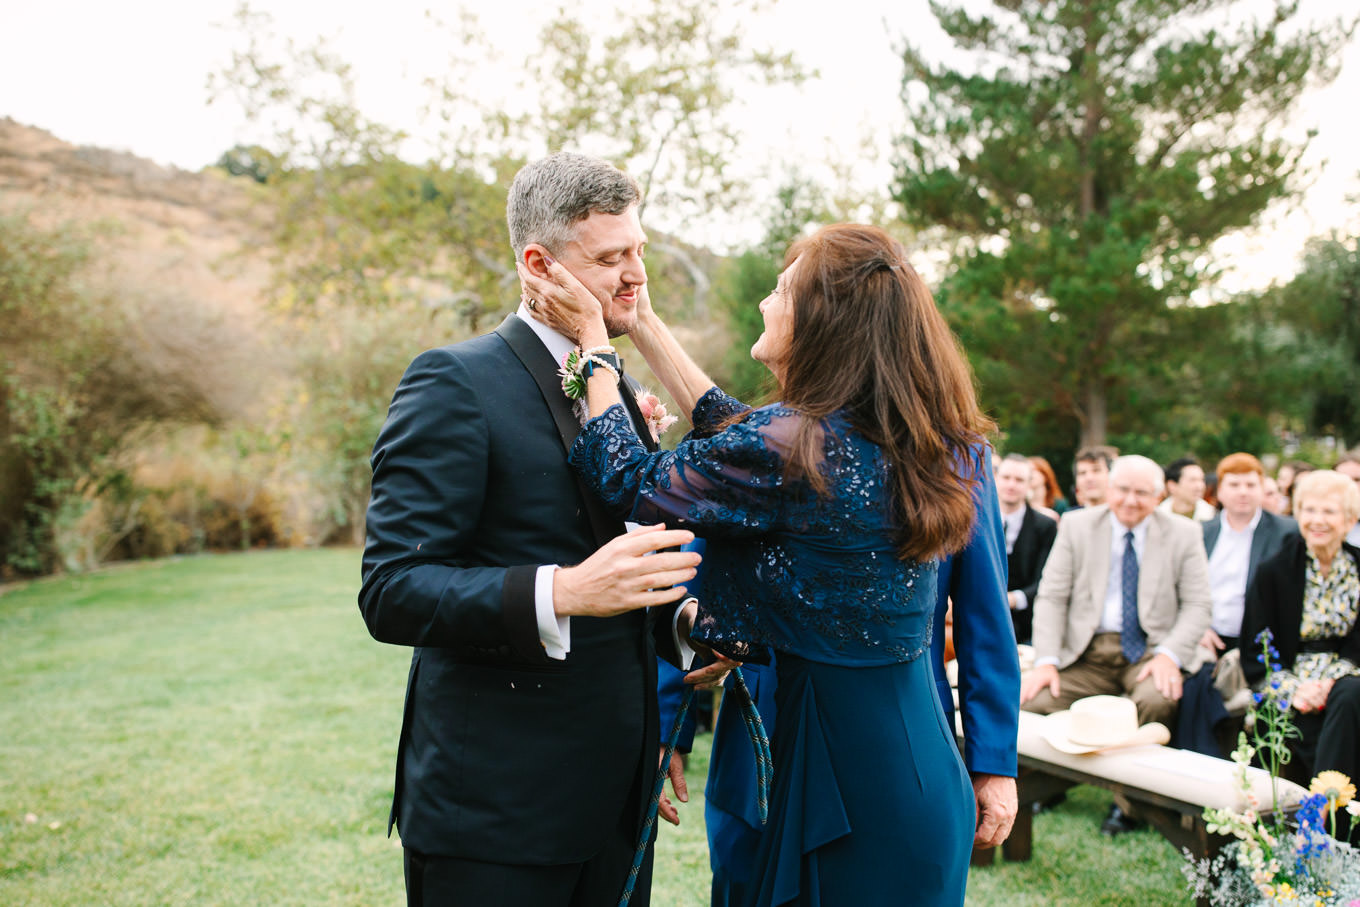 Groom with his mom at wedding ceremony | Colorful and quirky wedding at Higuera Ranch in San Luis Obispo | #sanluisobispowedding #californiawedding #higueraranch #madonnainn   
Source: Mary Costa Photography | Los Angeles